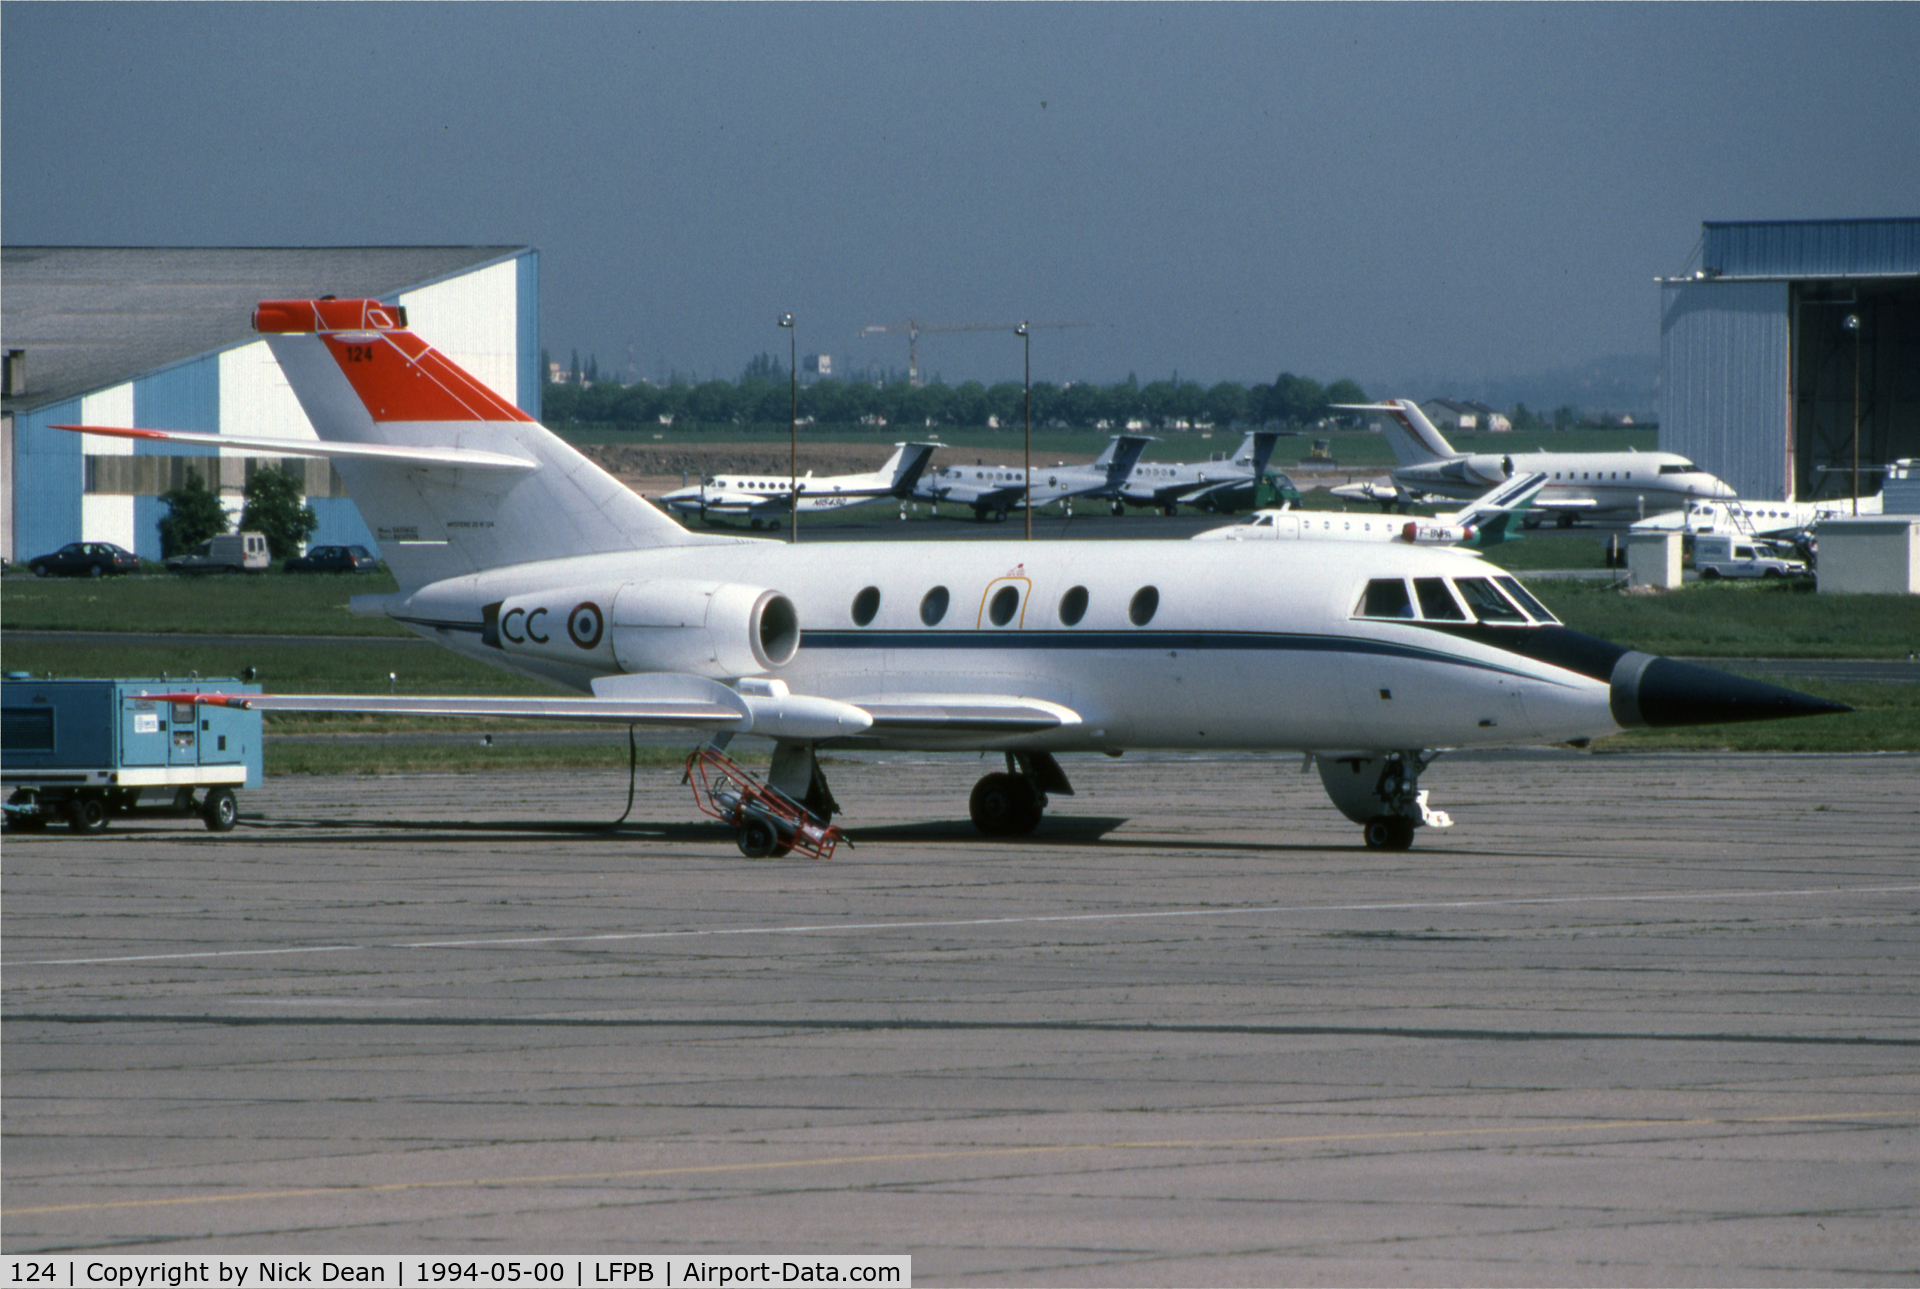 124, 1968 Dassault Falcon (Mystere) 20C C/N 124, LFPB Paris Le Bourget (2 Malaysian air force King Air 200's on delivery sitting on the Transair ramp in the background)